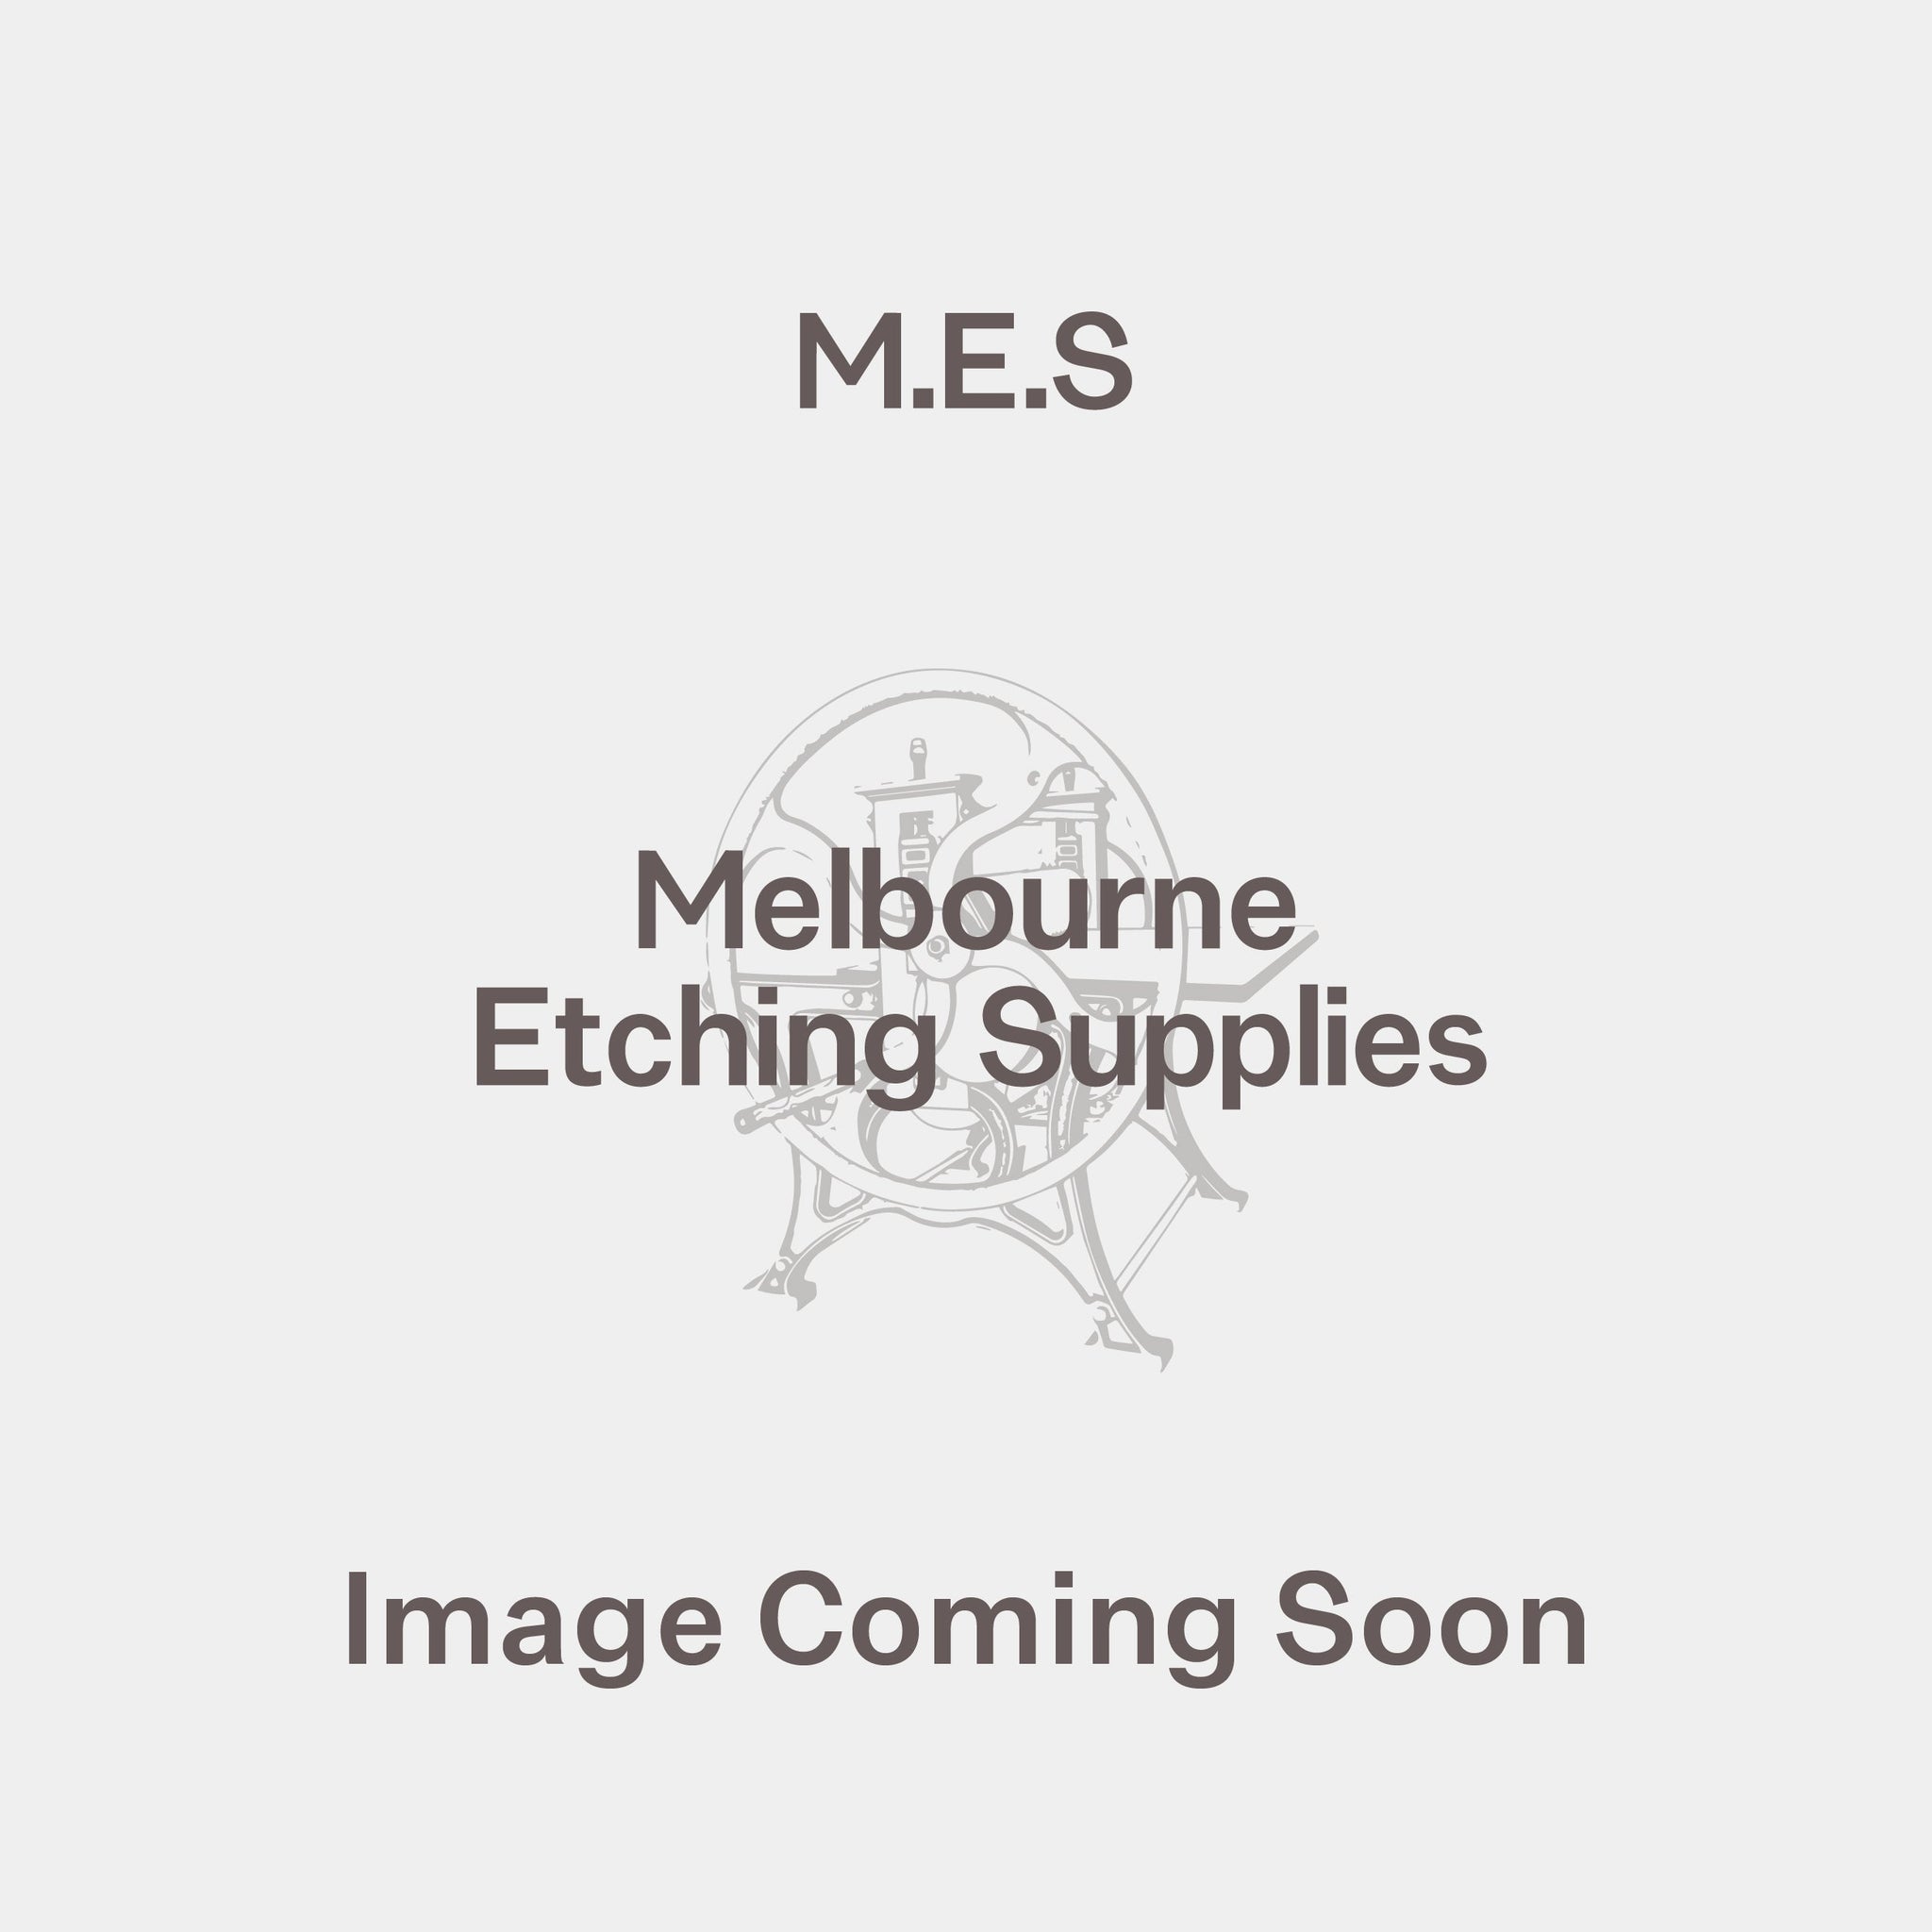 Peel and Sketch Pencil - Melbourne Etching Supplies